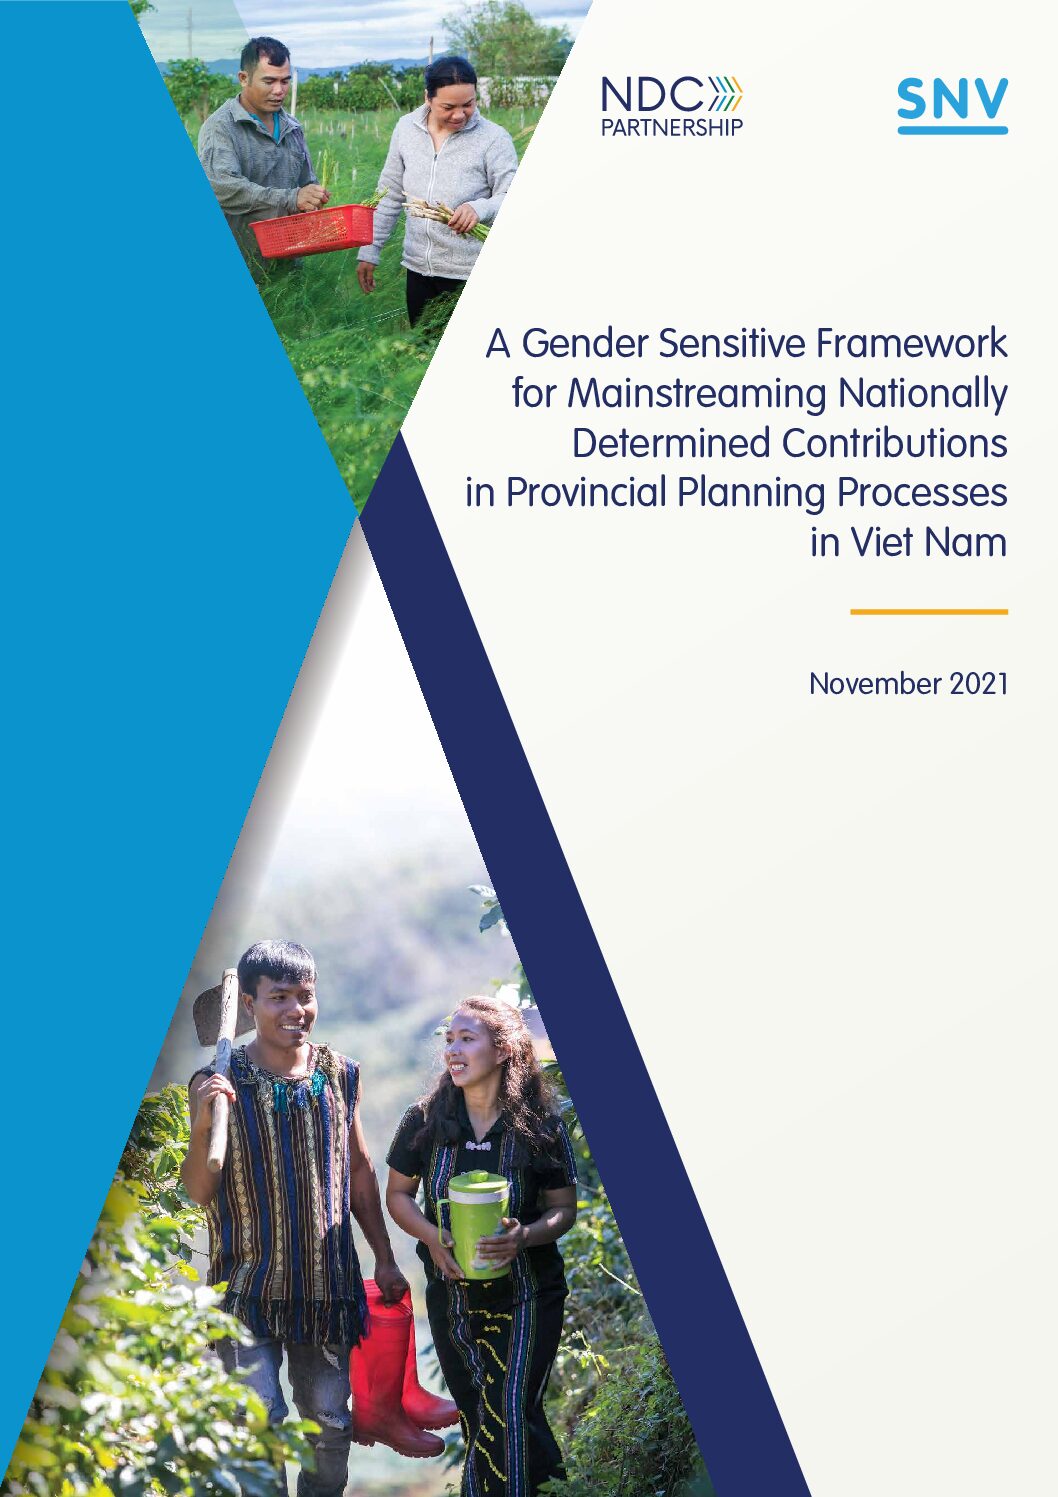 A Gender Sensitive Framework for Mainstreaming Nationally Determined Contributions in Provincial Planning Processes in Viet Nam